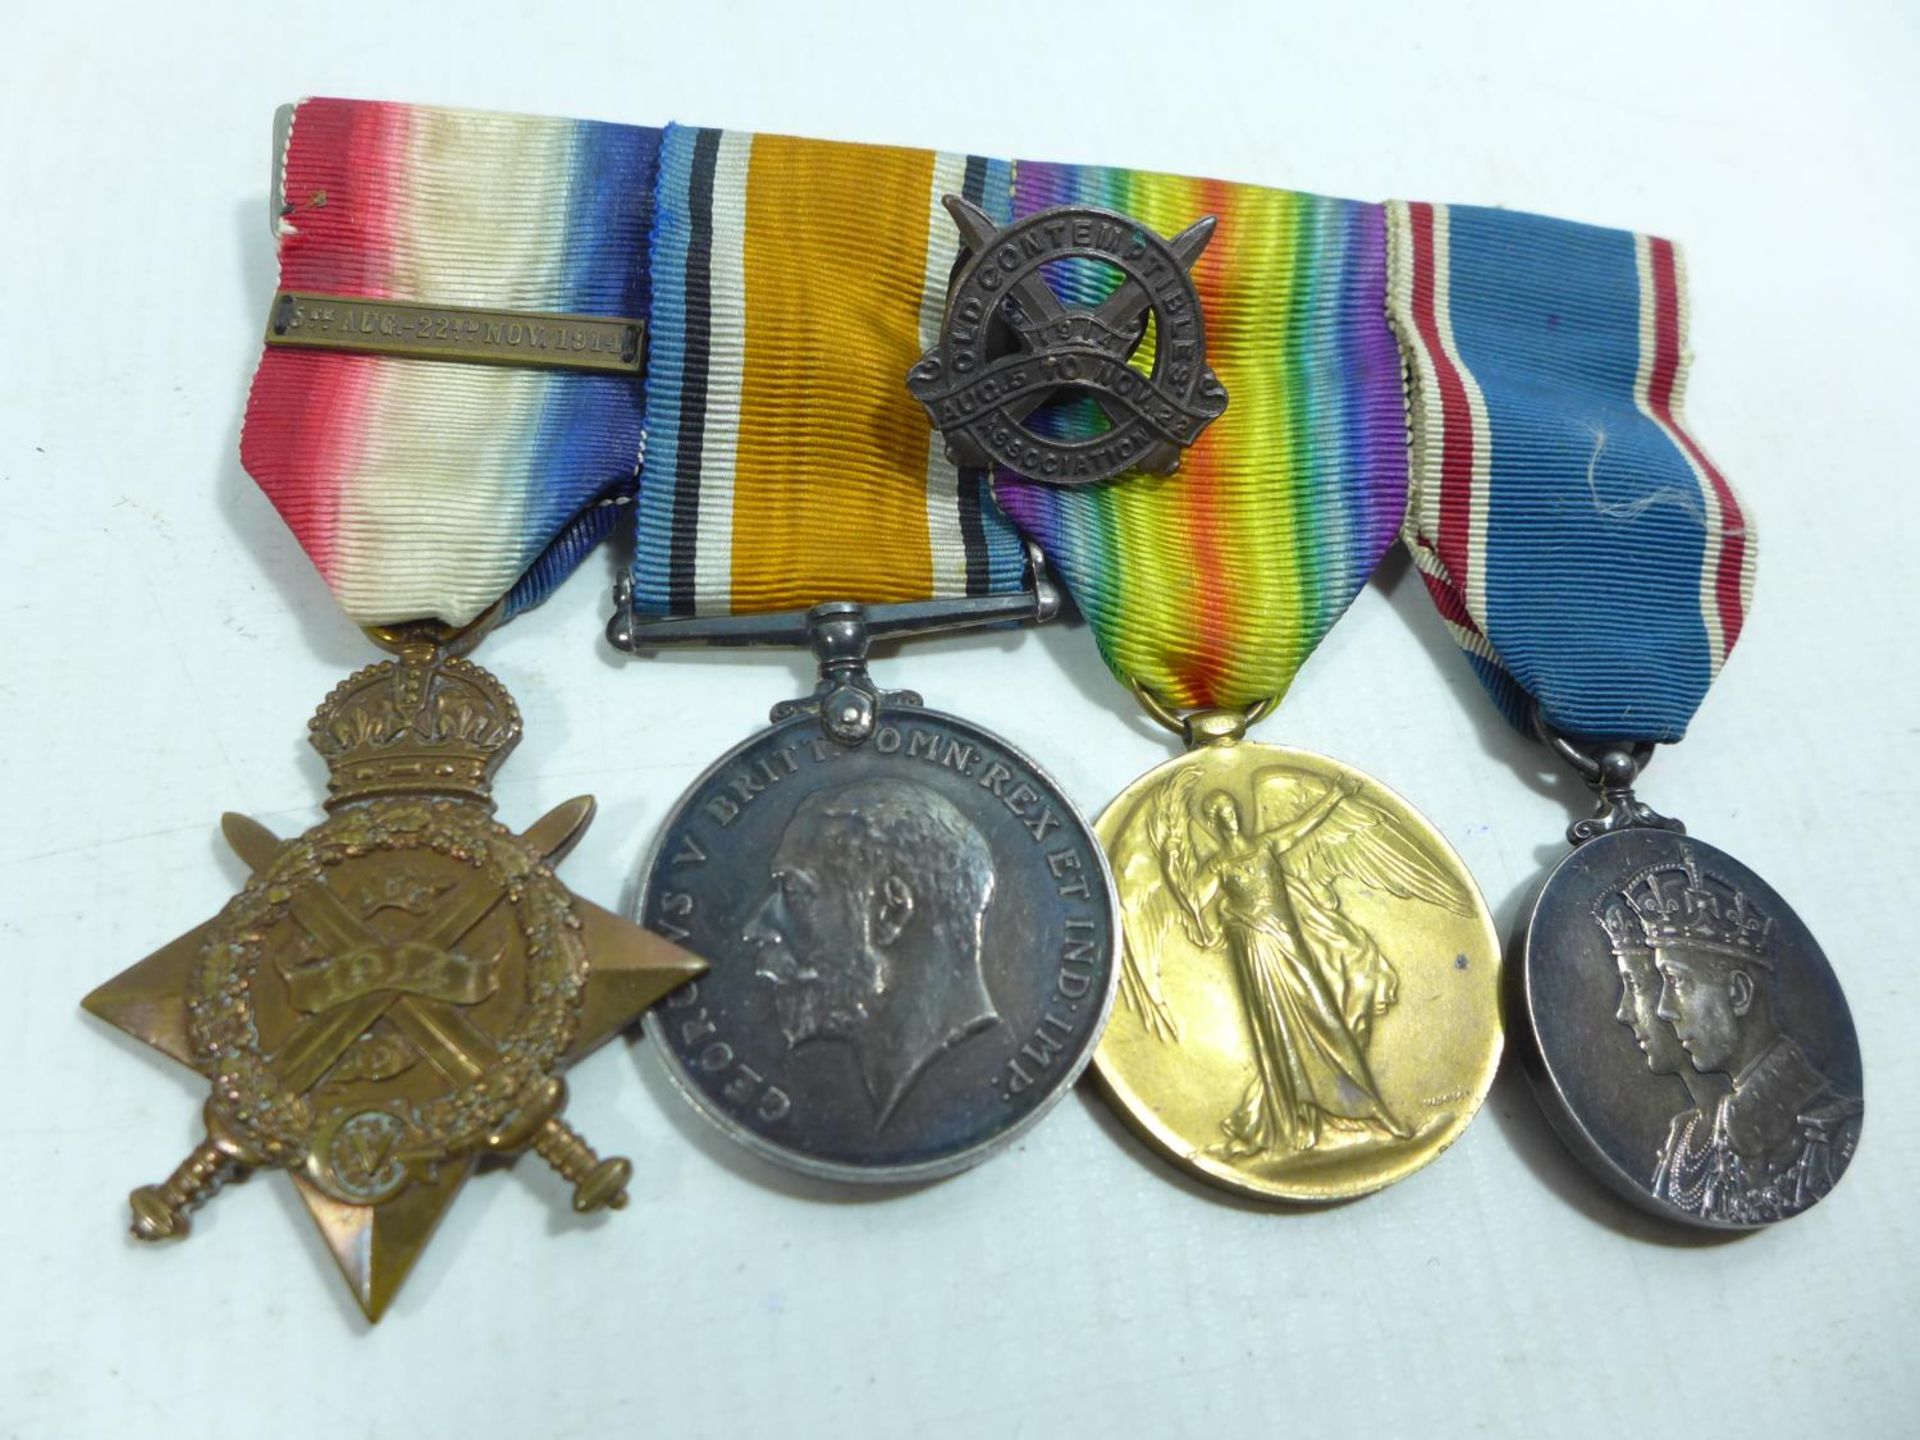 A WORLD WAR I MEDAL GROUP AWARDED TO 28797 2ND LIEUTENANT G HEMINGWAY OF THE ROYAL ENGINEERS,